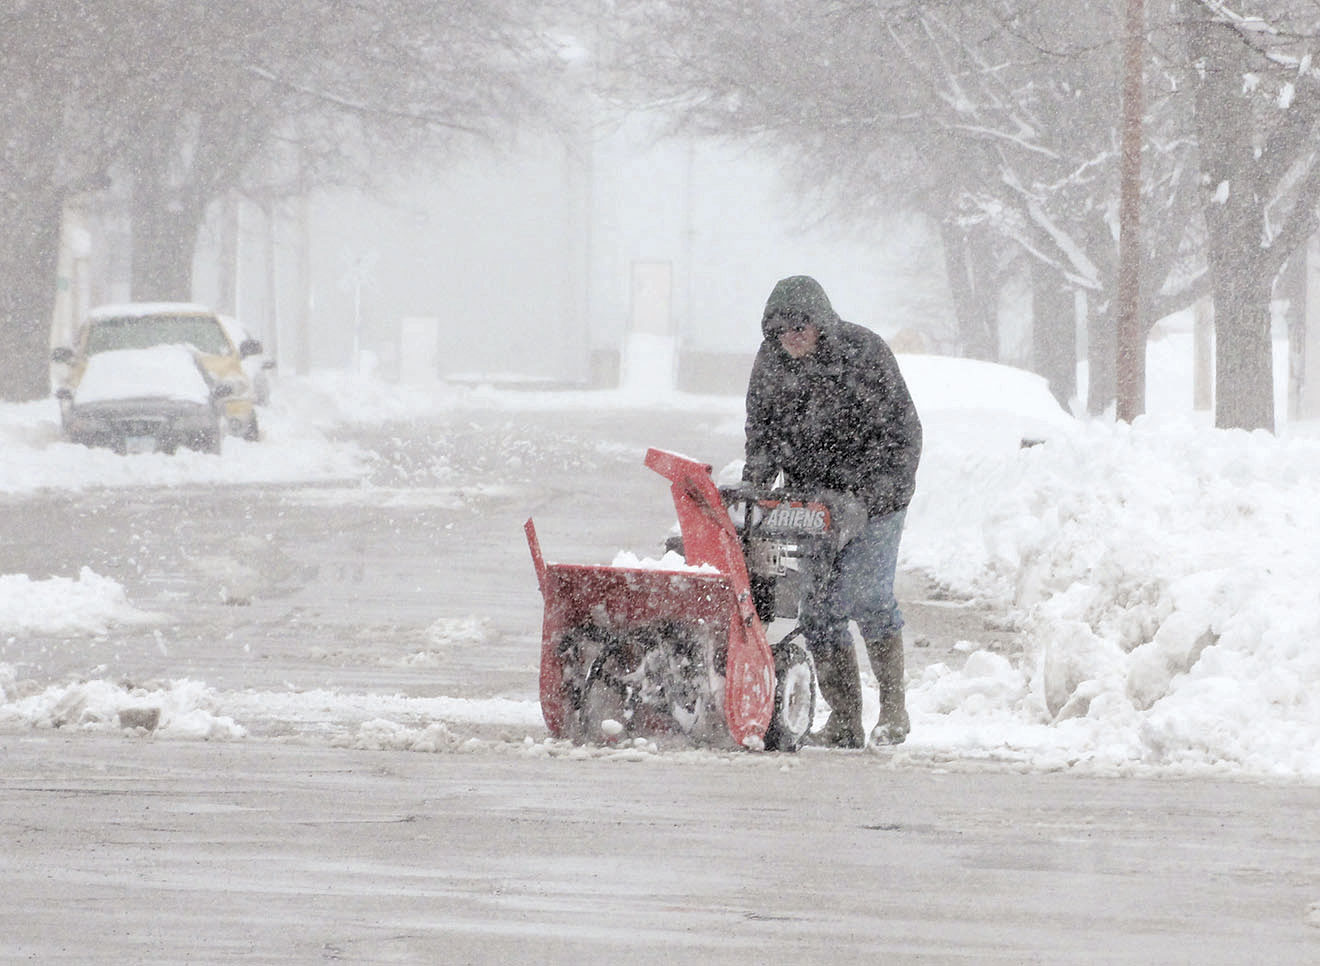 March mayhem: Storm drops 14 inches of snow on Charles City